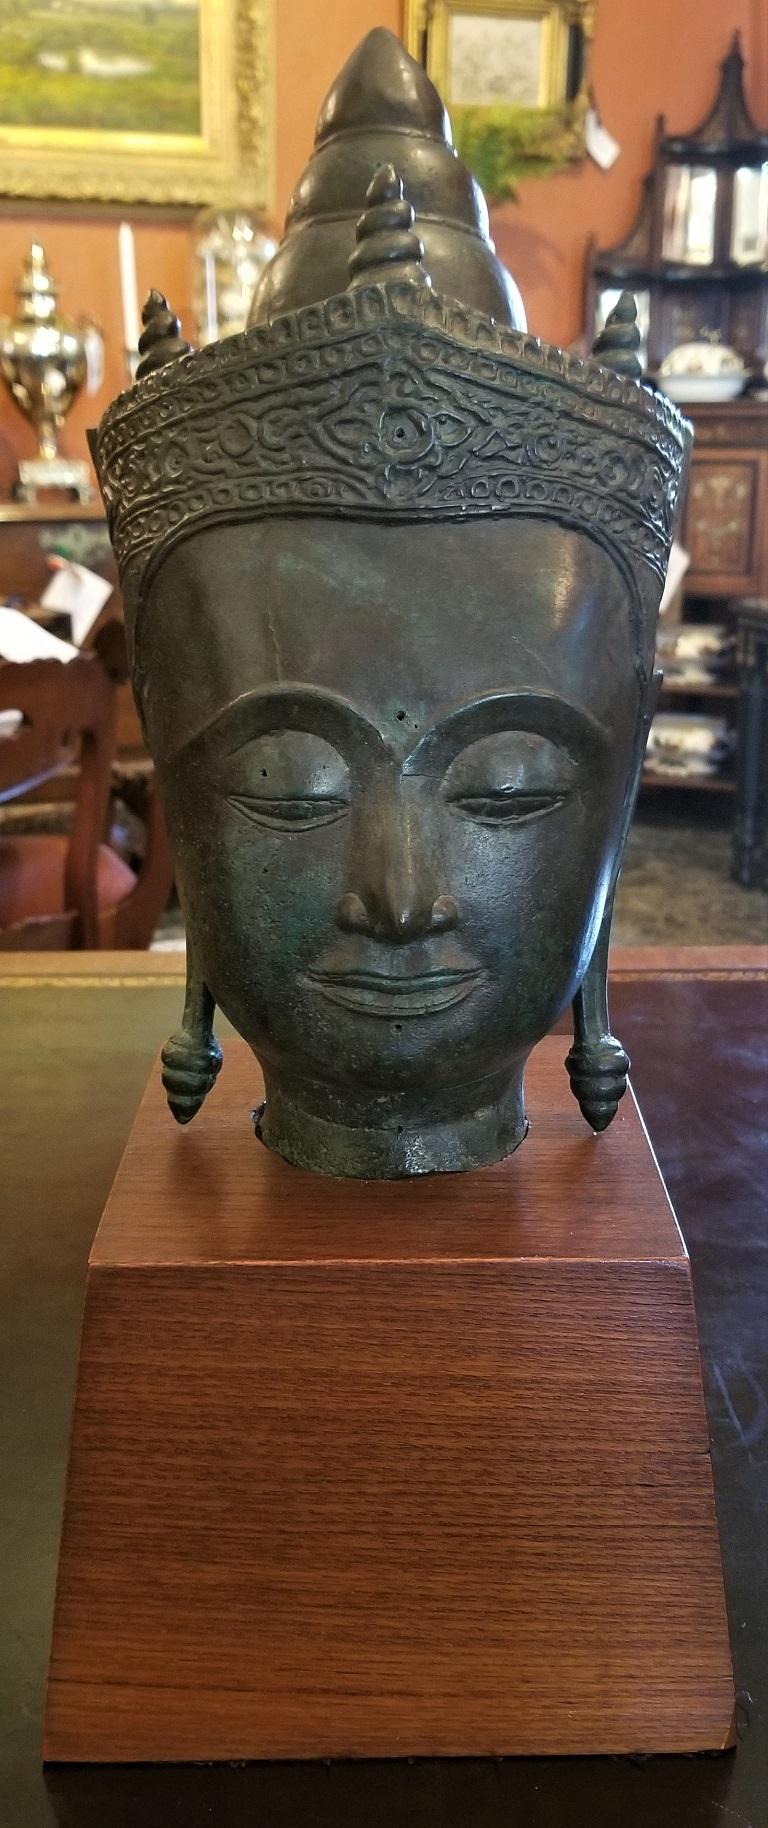 Presenting a stunning 19th century Thai bronze Buddha head on stand.

From circa 1860-80 and from South Eastern Asia, most likely Thailand.

This is a hollow cast bronze head of Buddha, in the Classic South East Asian design and